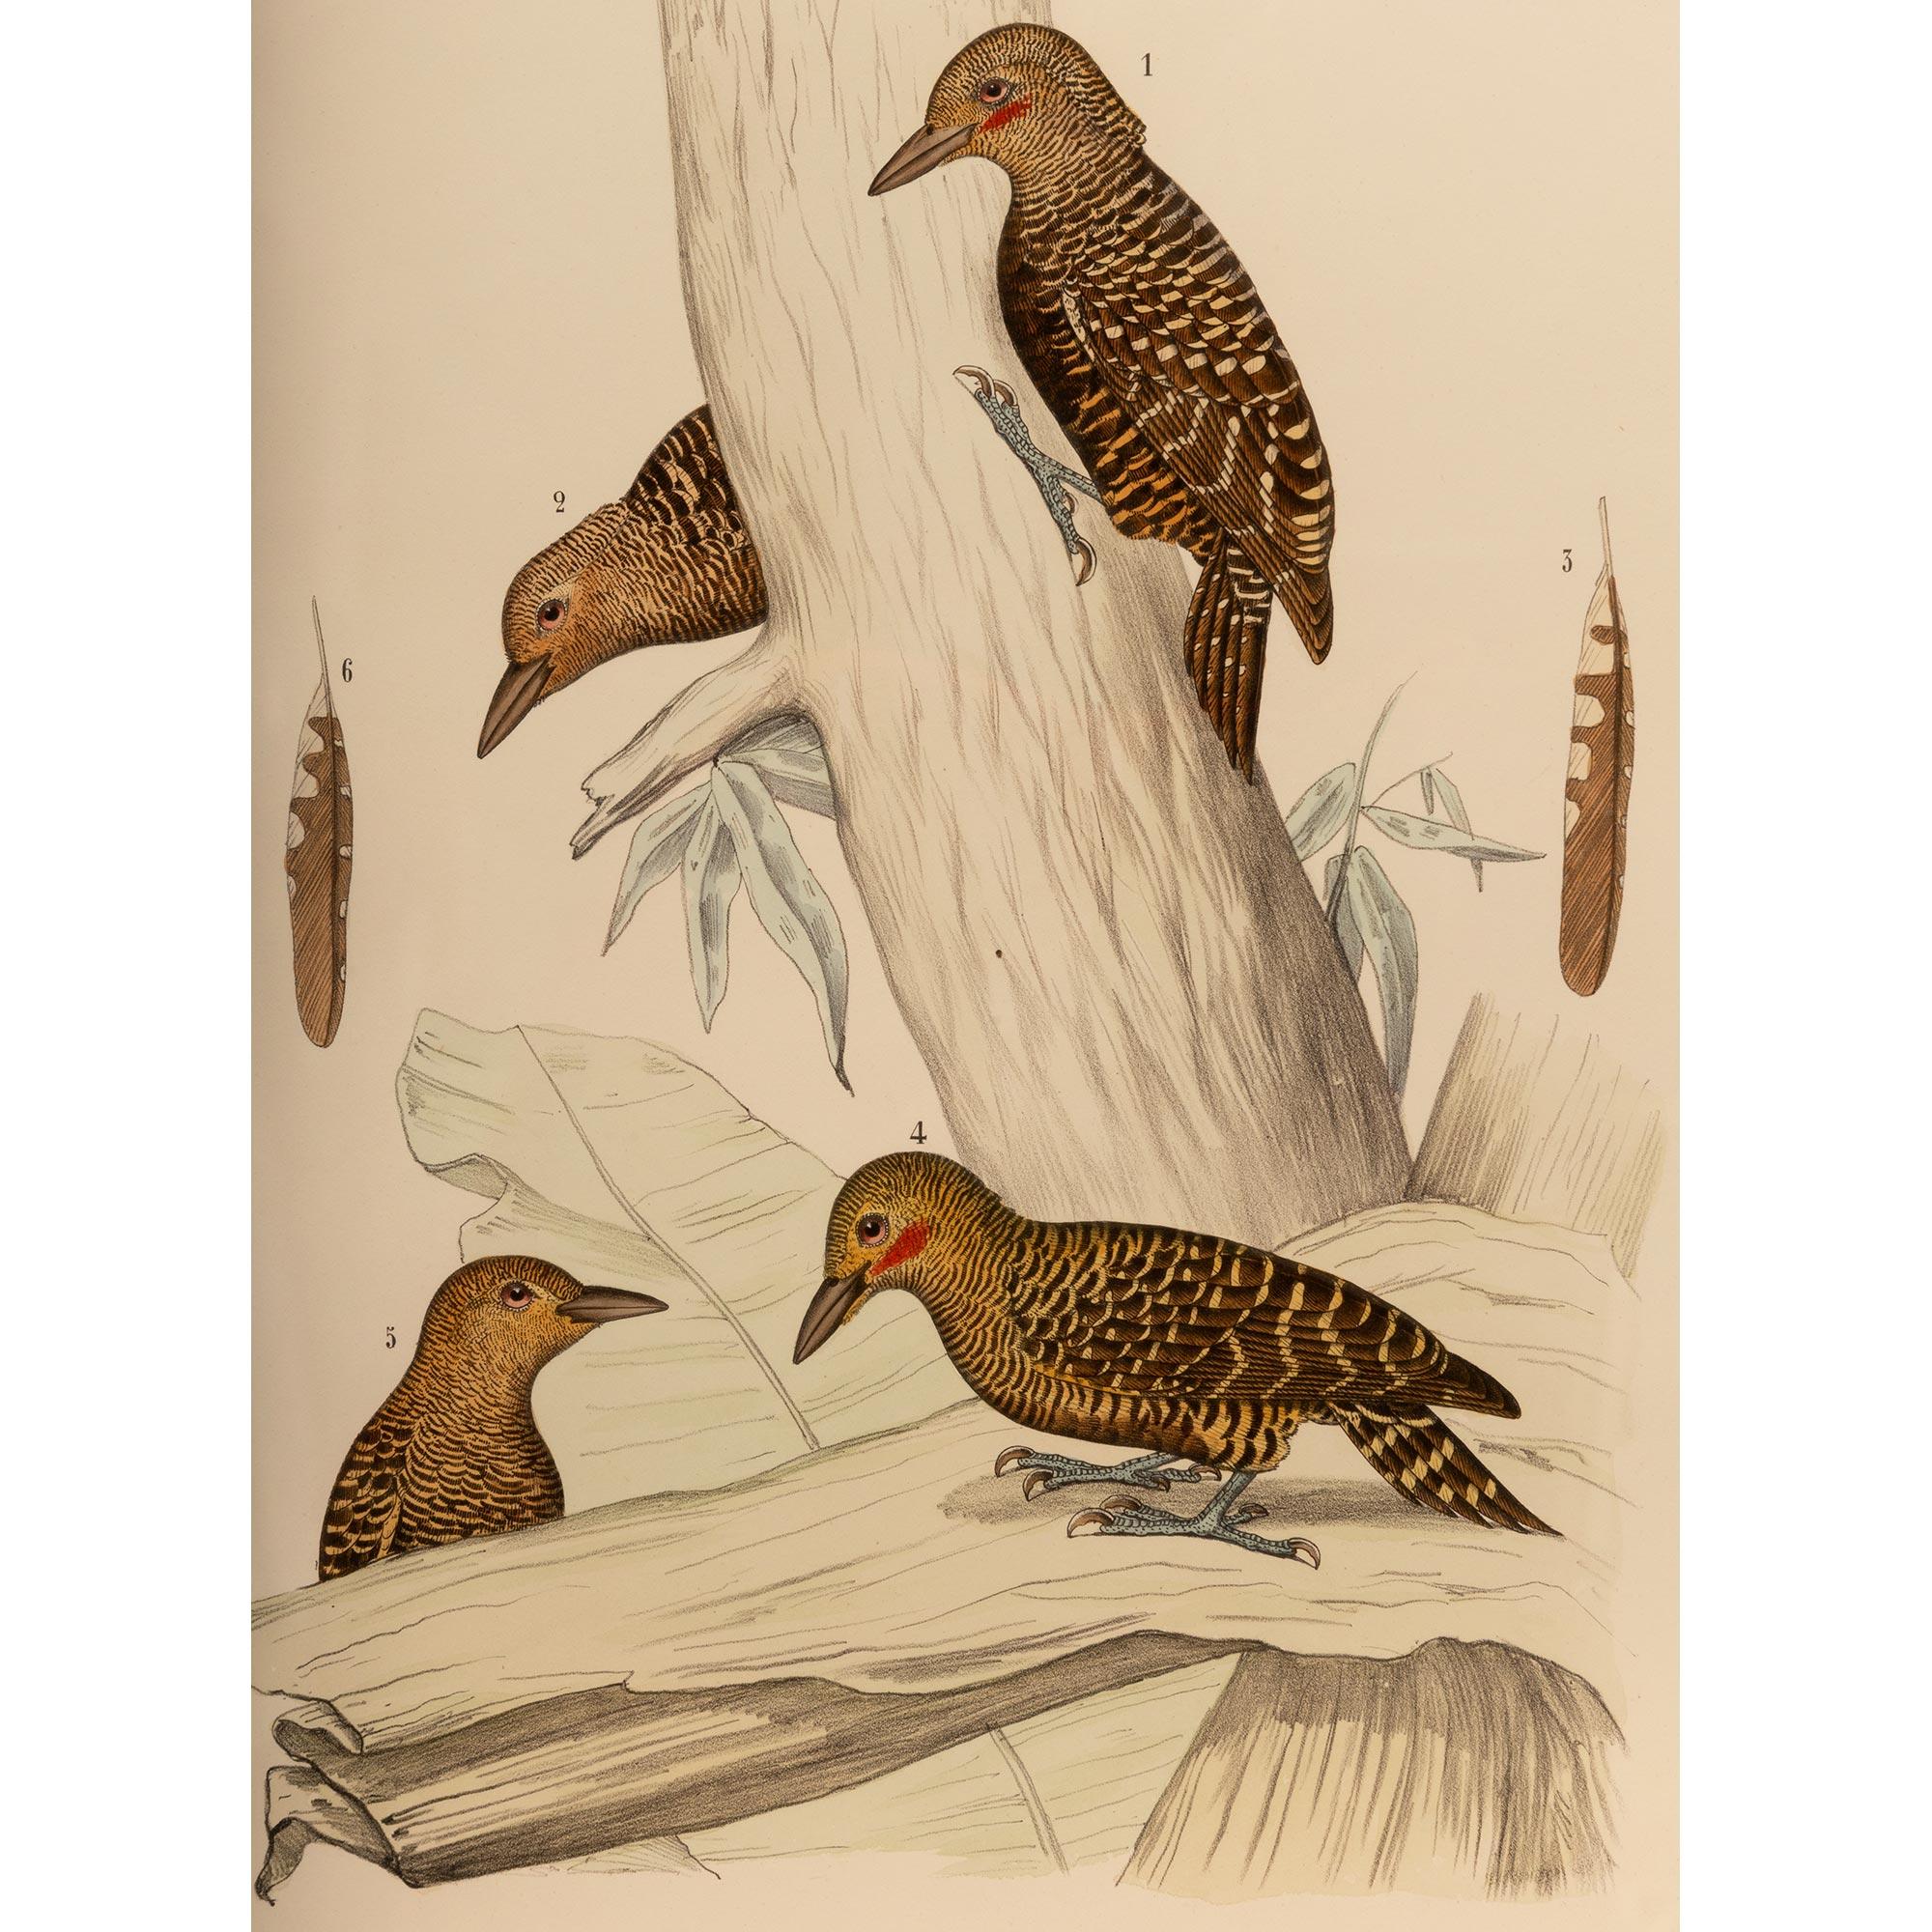 A lovely pair of 19th century ornithological color prints of European birds, within an elegant wood frame. The science of ornithology has a long history and studies on birds have helped develop several key concepts in evolution, behavior and